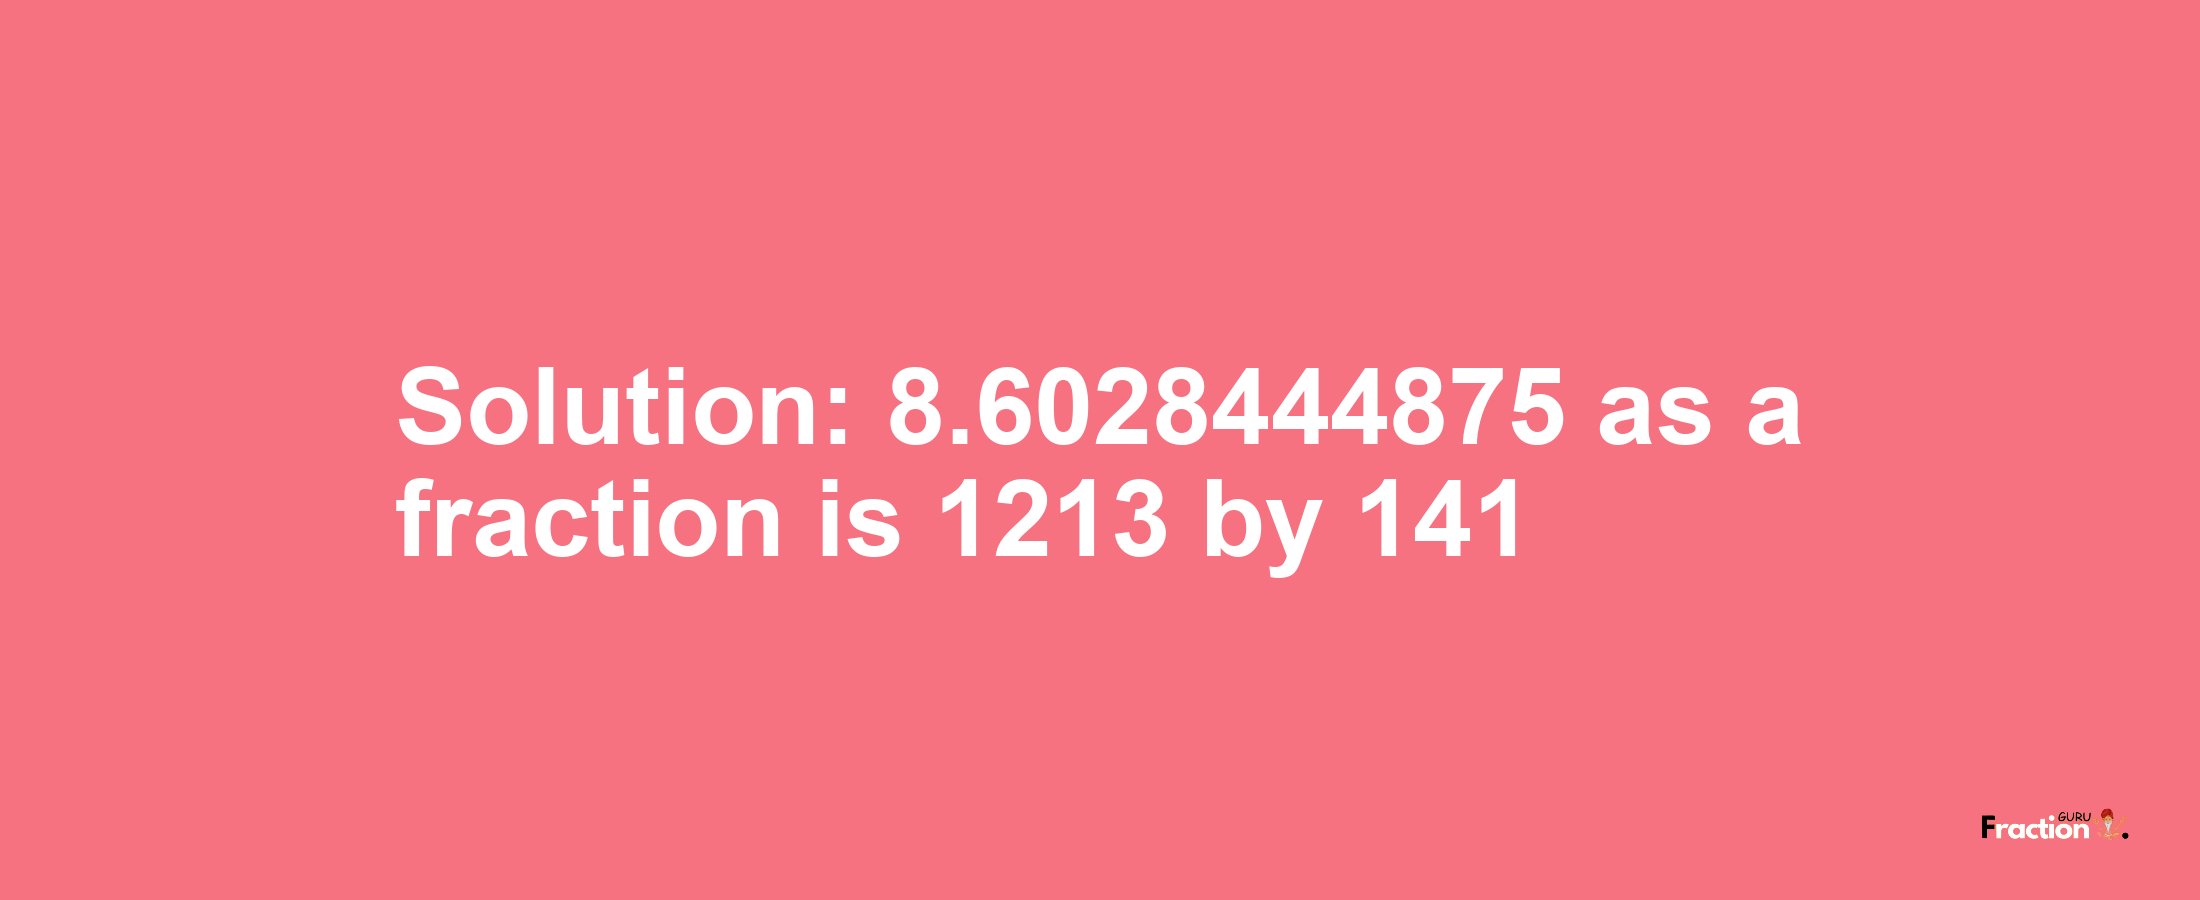 Solution:8.6028444875 as a fraction is 1213/141